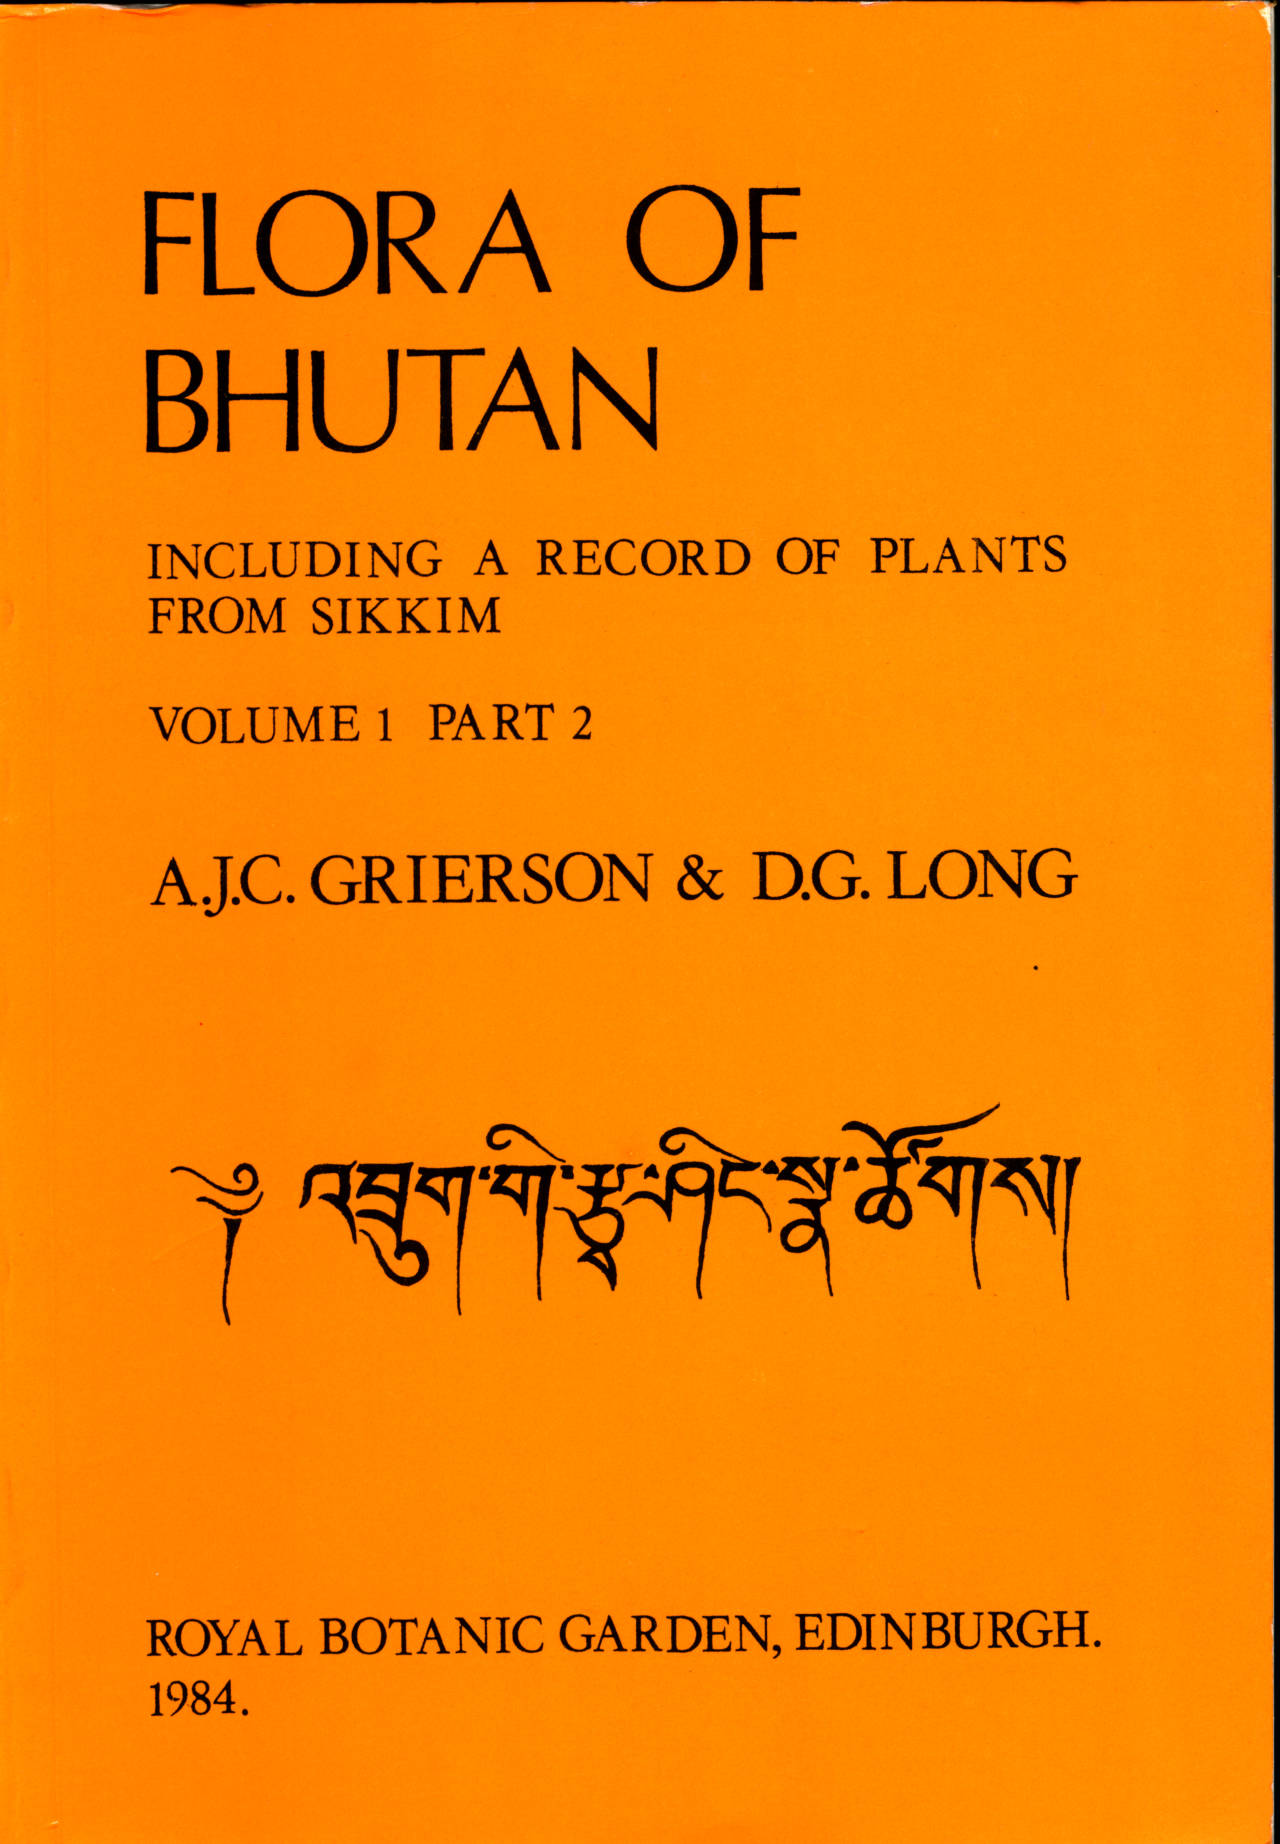 FLORA OF BHUTAN INCLUDING A RECORD OF PLANTS FROM SIKKIM VOLUME 1 PART 2